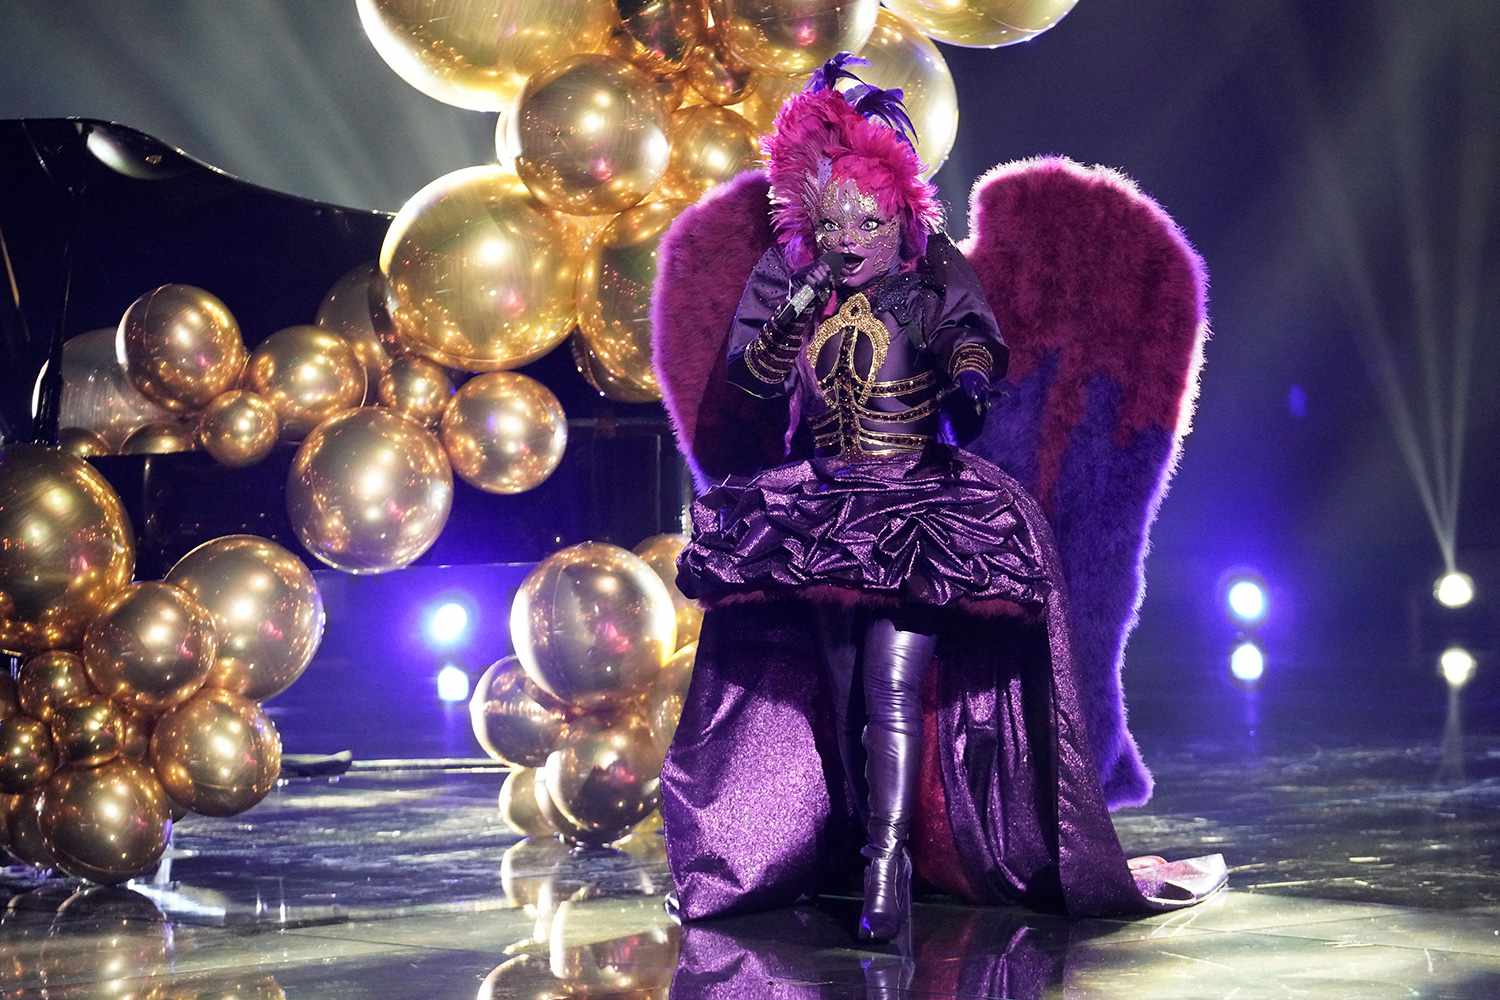 The Masked Singer: Night Angel in the &ldquo;It Never Hurts to Mask: Group C Playoffs&rdquo; episode of THE MASKED SINGER airing Wednesday, March 18